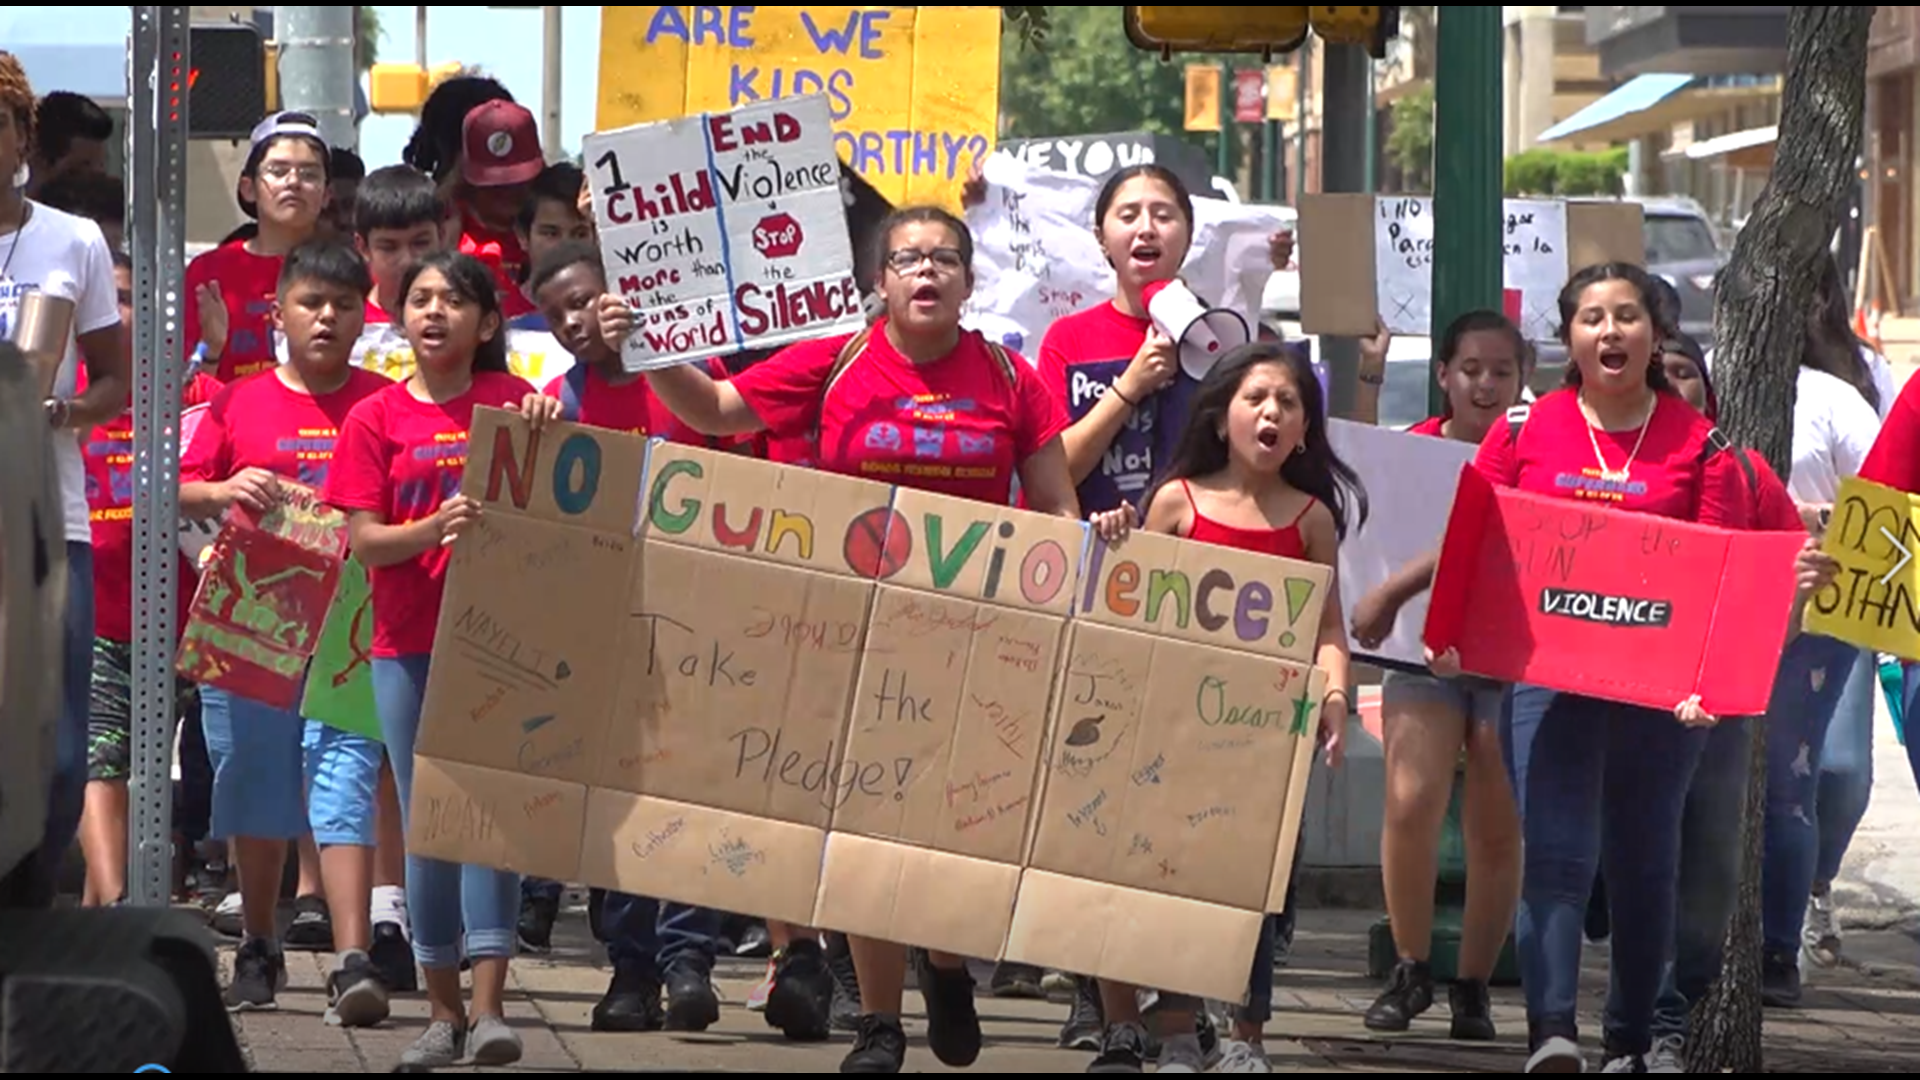 As a part of the National Day of Social Action, students from Baylor Freedom School marched in front of the McLennan County Courthouse to raise awareness about gun control.